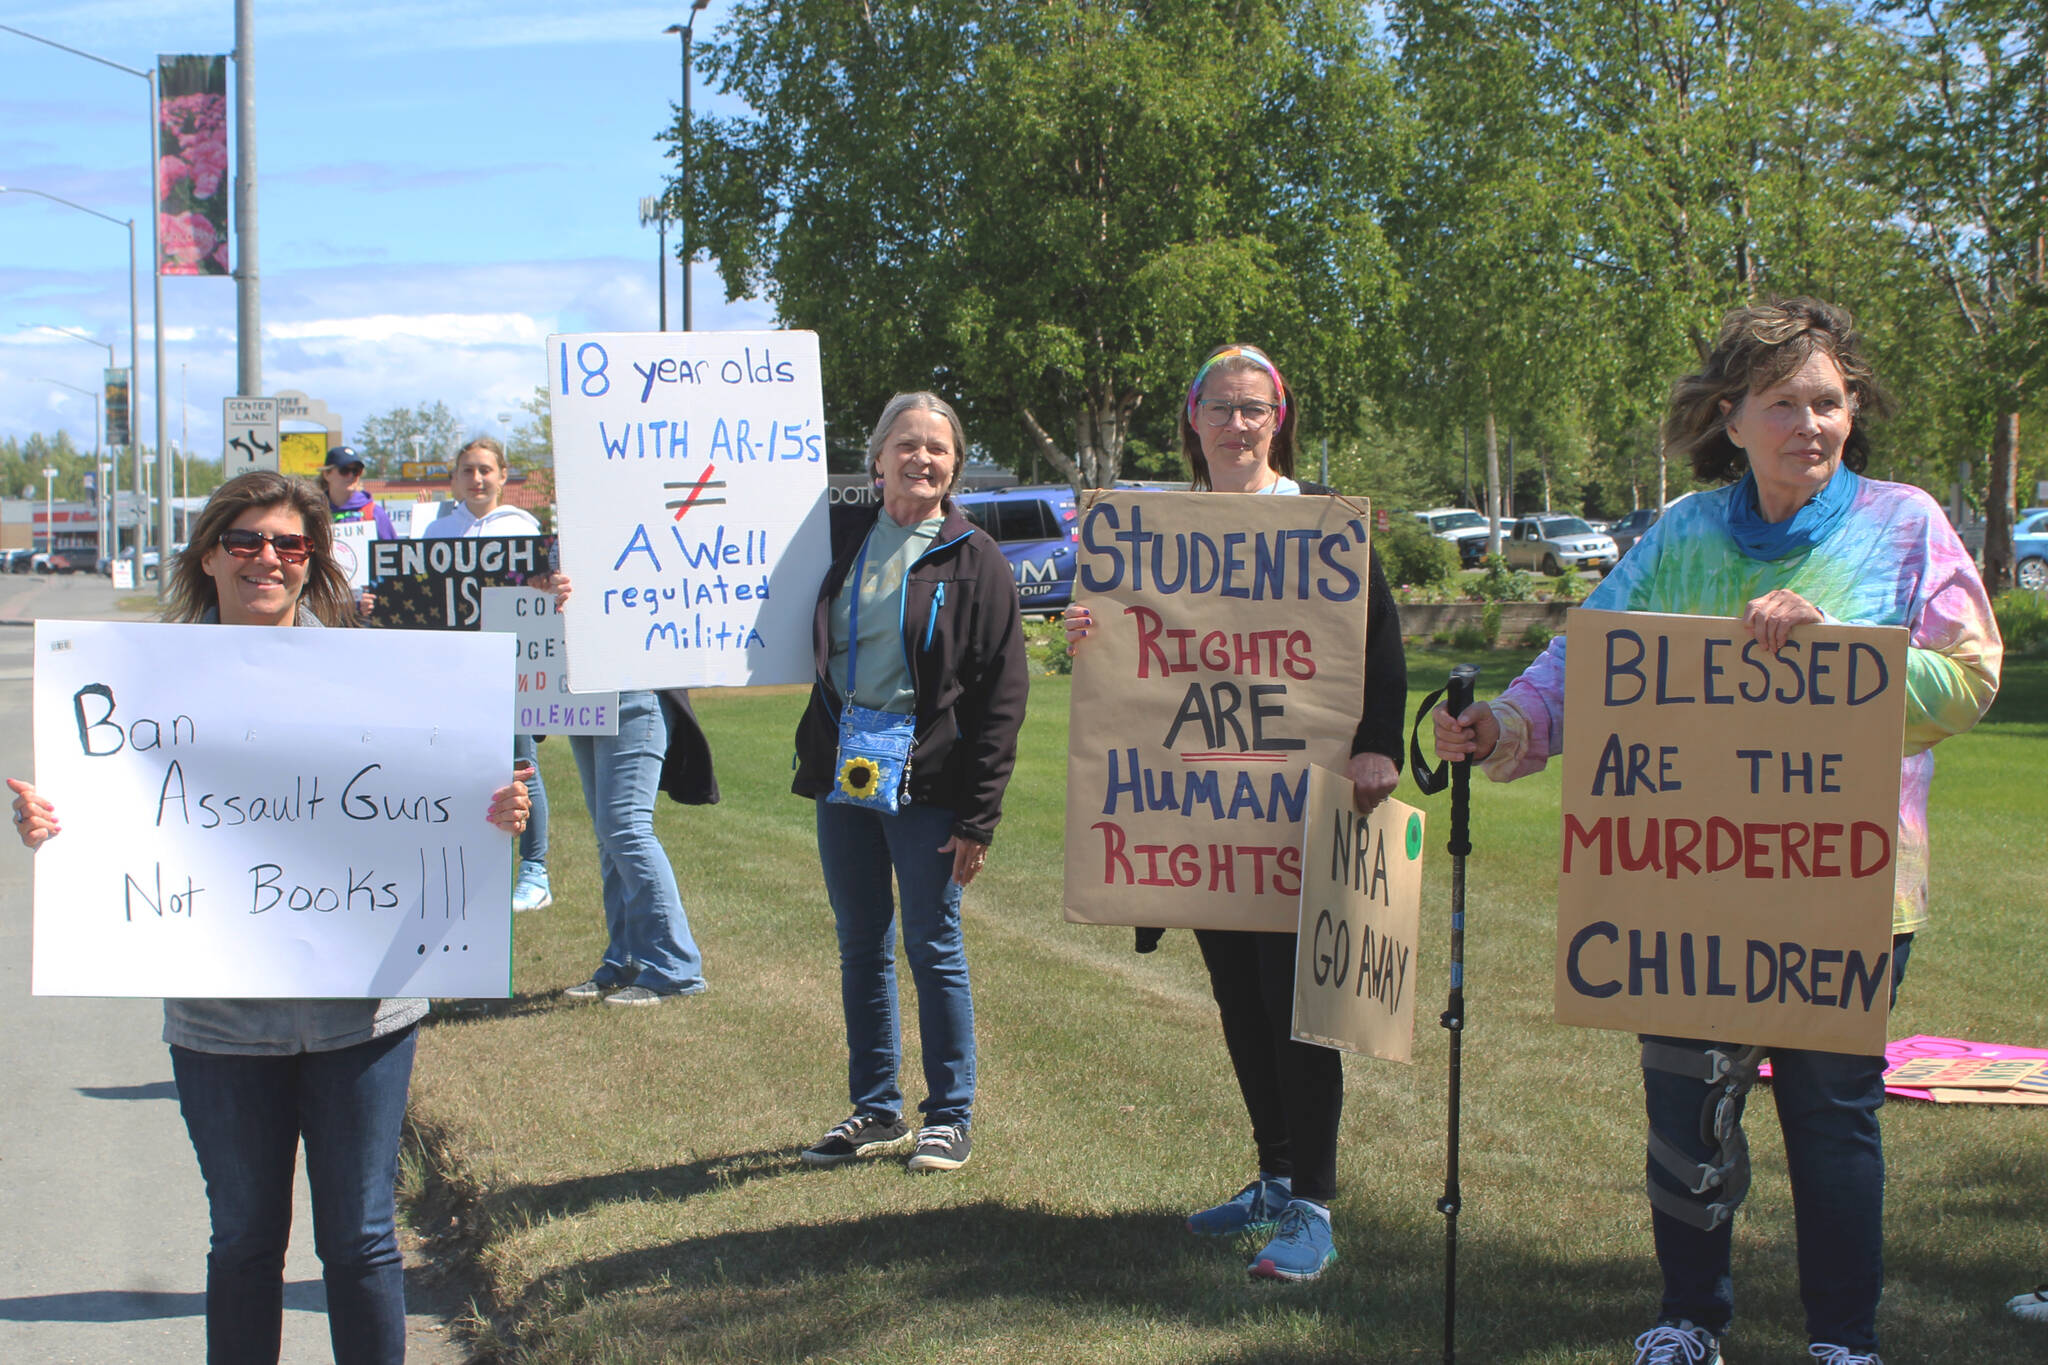 People hold signs during a demonstration opposing gun violence on Saturday, June 11, 2022 in Soldotna, Alaska. The local protest was part of a nationwide call to action issued by the nonprofit organization March for Our Lives, which was formed after a 2018 school shooting in Parkland, Florida and aims to end gun violence. (Ashlyn O'Hara/Peninsula Clarion)